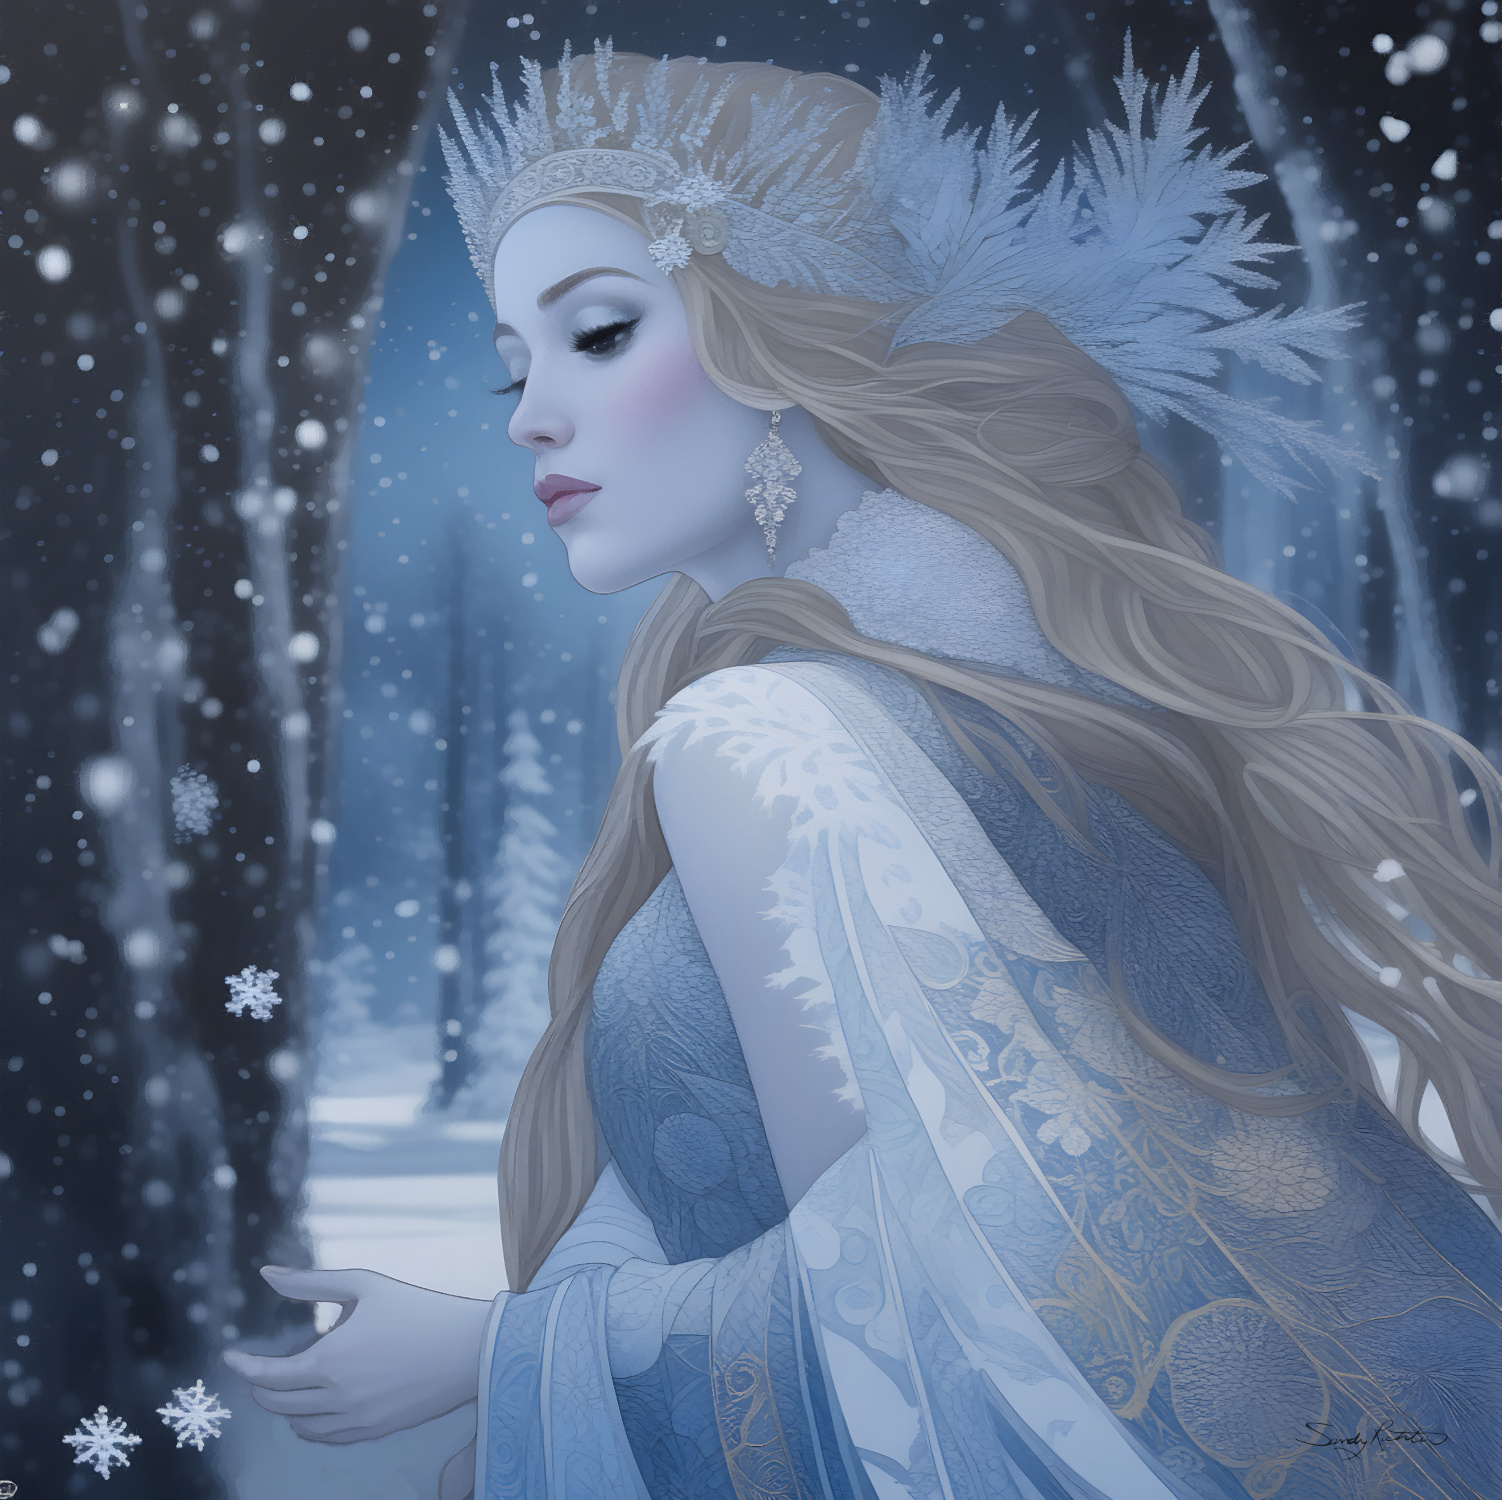 Snow Queen in the Winter Forest Fantasy Painting Step into a winter wonderland ❄